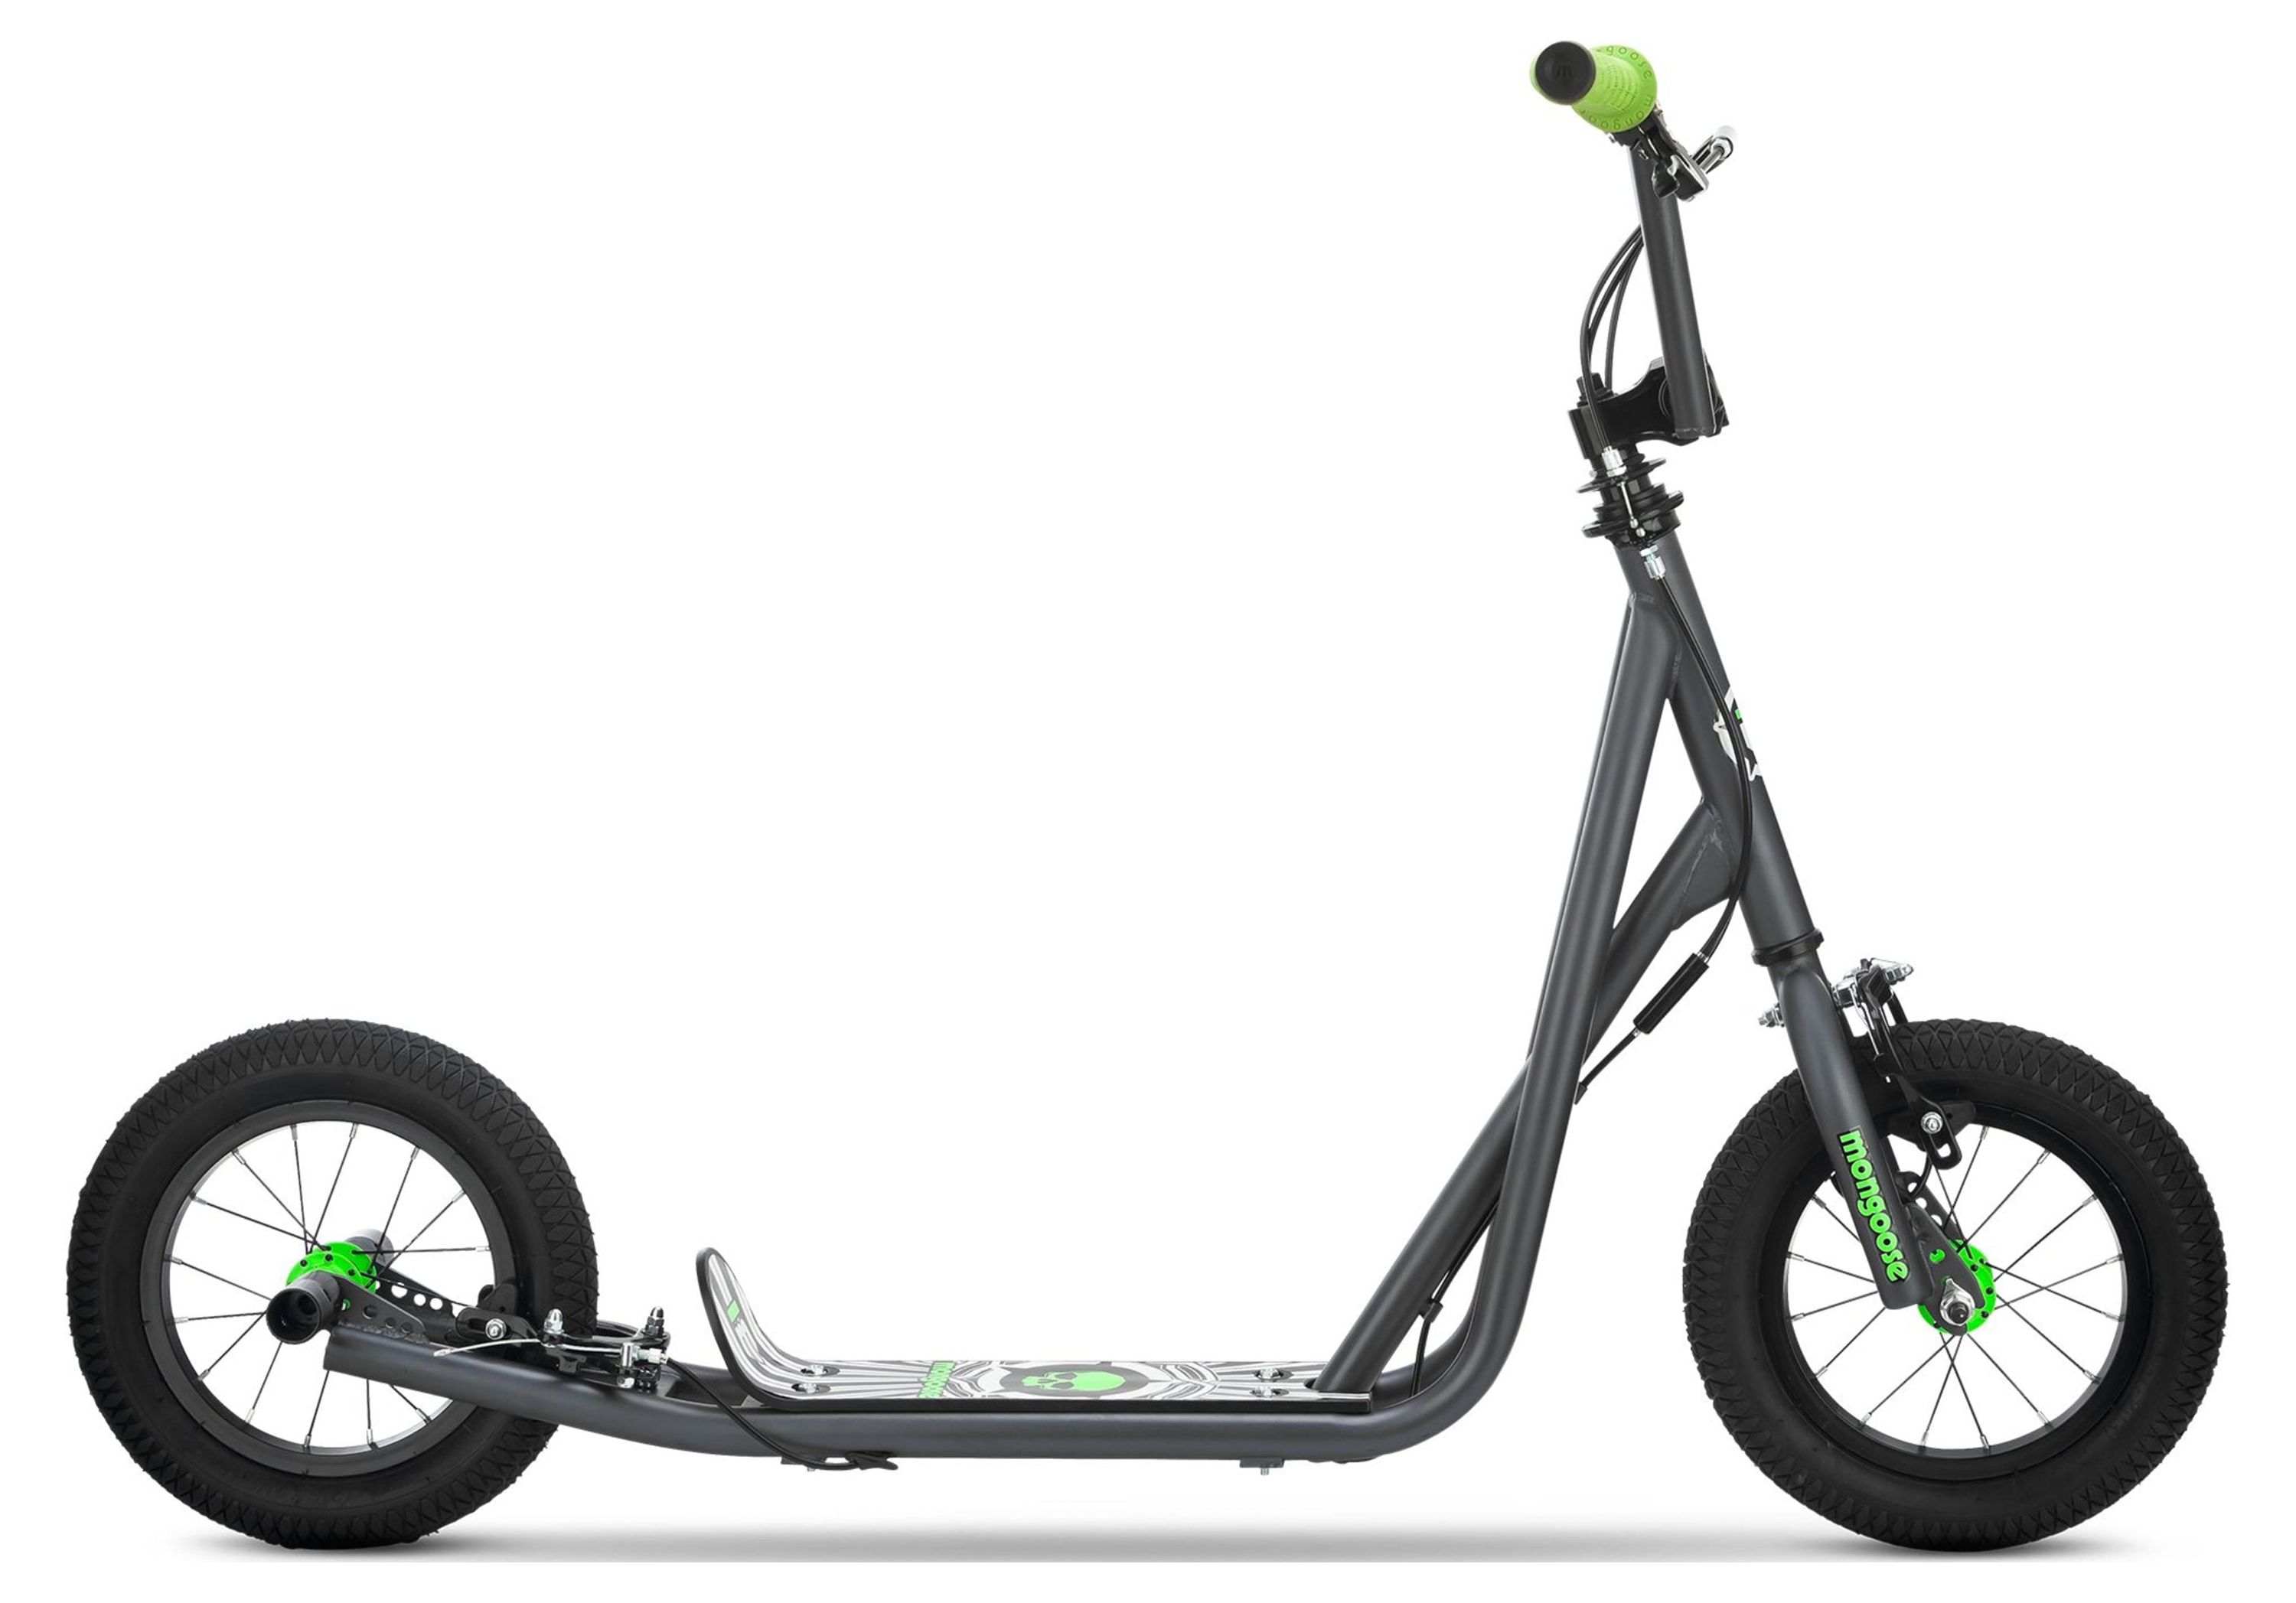 Mongoose Expo Scooter, 12-inch wheels, ages 6 and up, grey - image 1 of 9